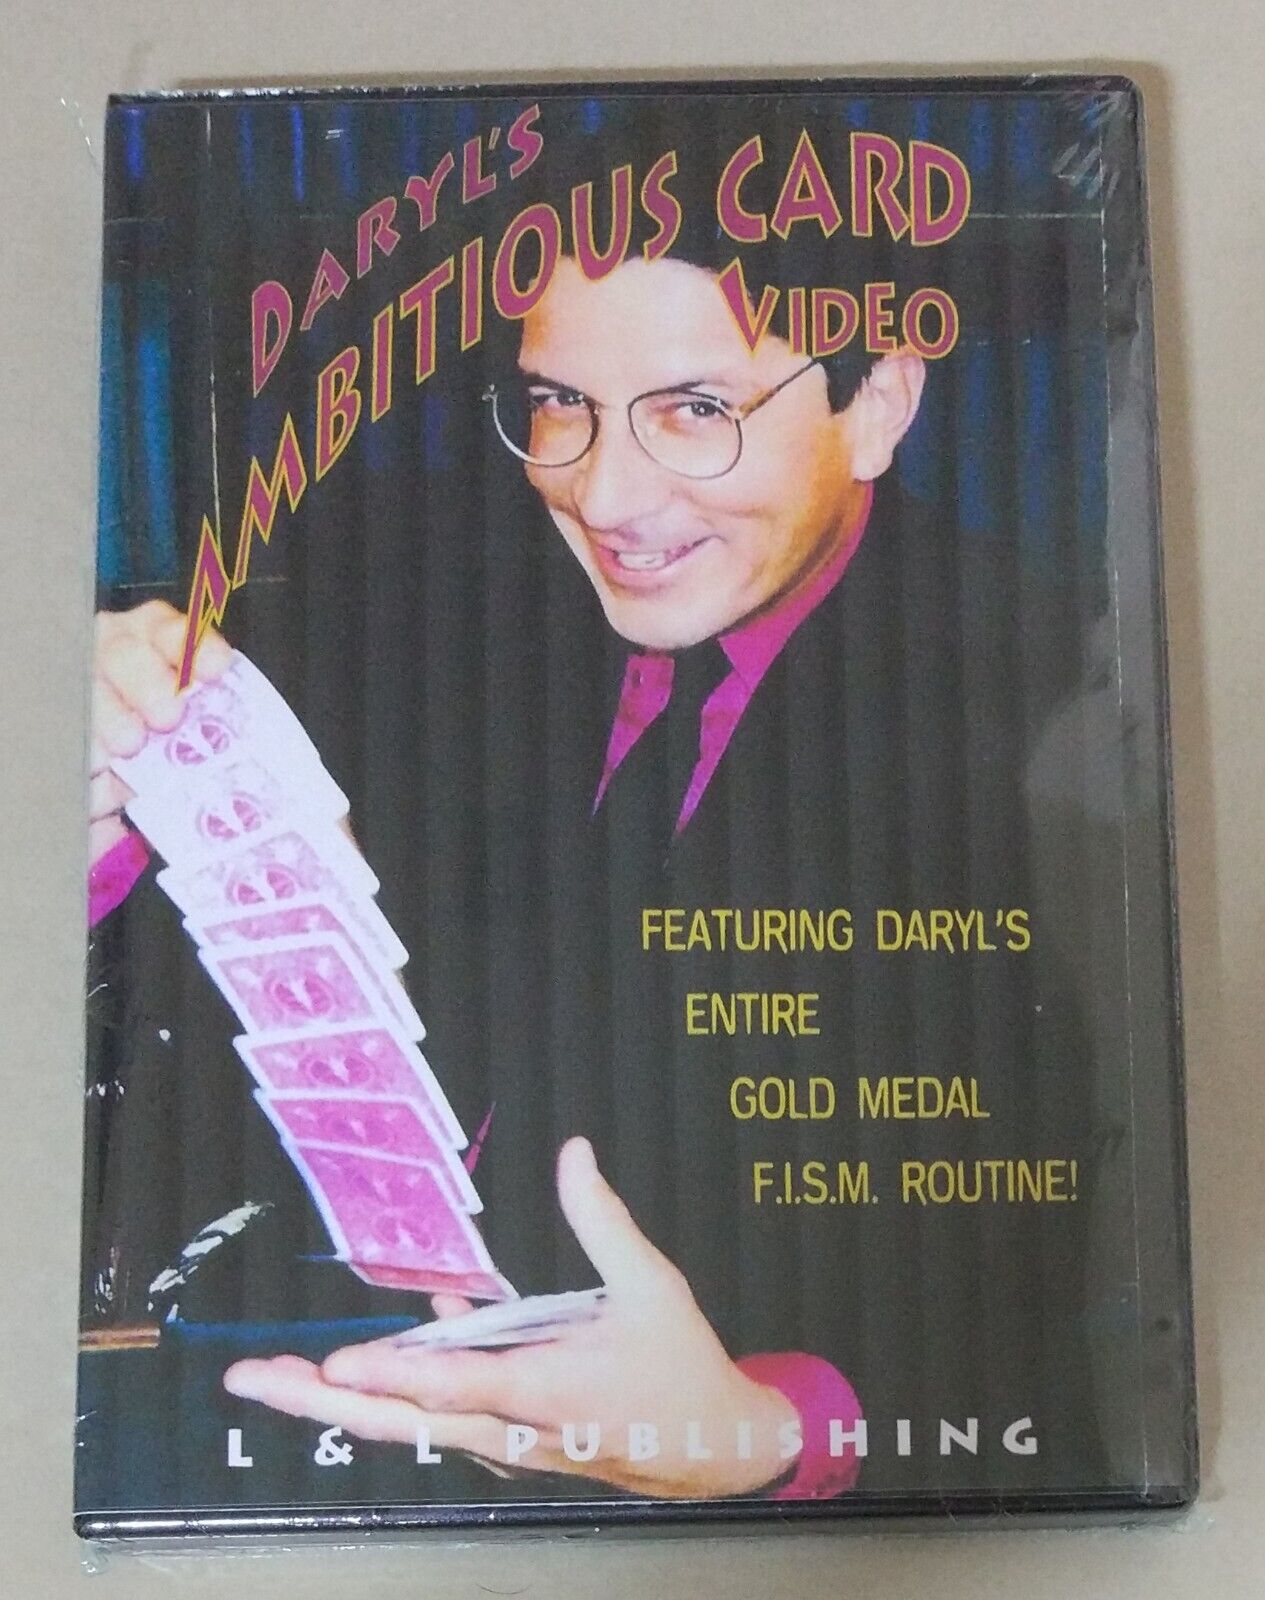 NEW - Daryl's Ambitious Card DVD The Only Ambitious Card Routine You Need Magic